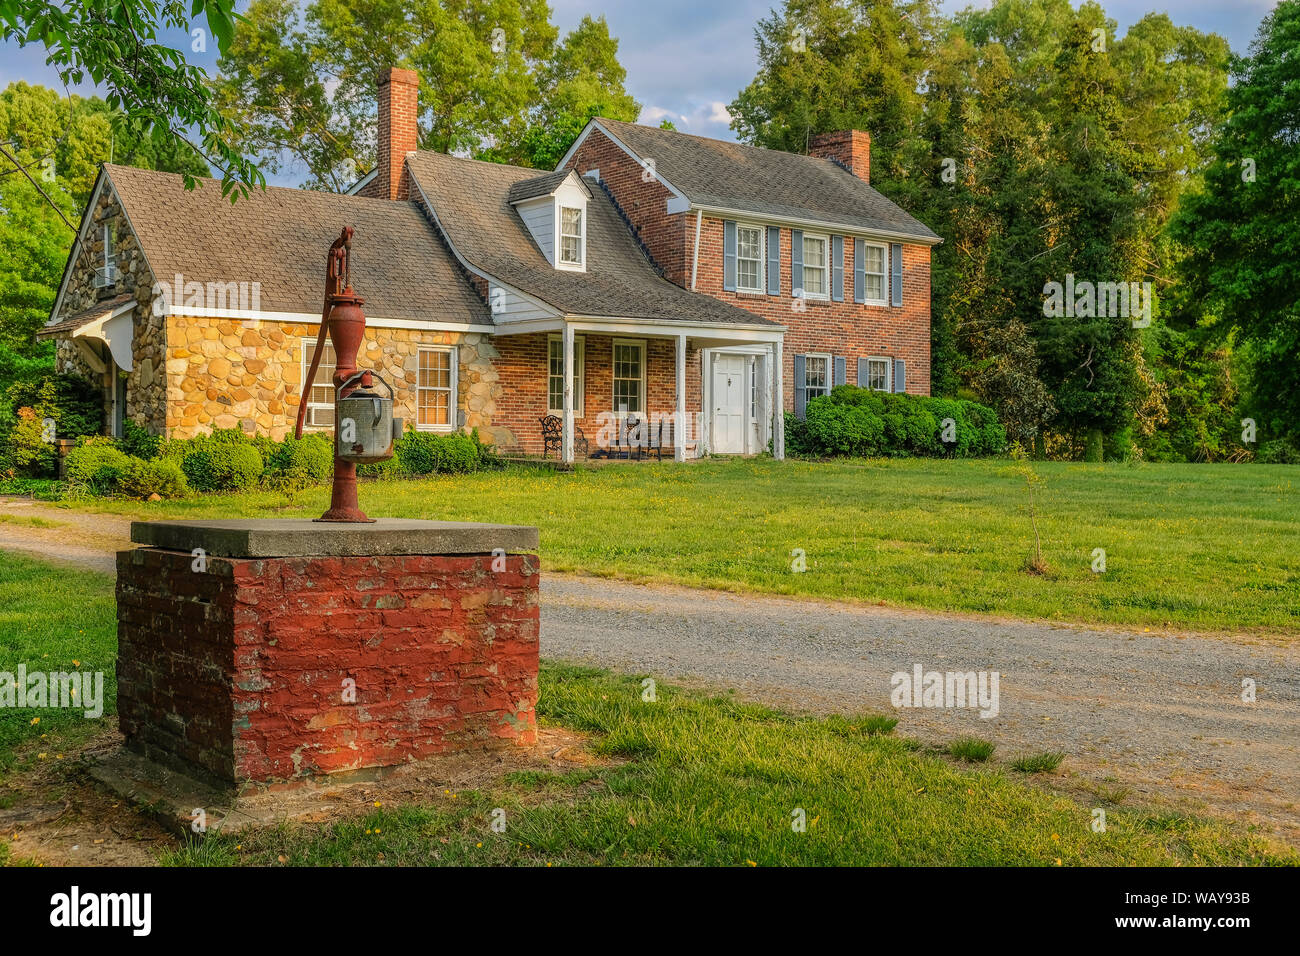 La Plata, Maryland, USA - May 11, 2018: Hand fountain in front of a stone farm surrounded by trees Stock Photo